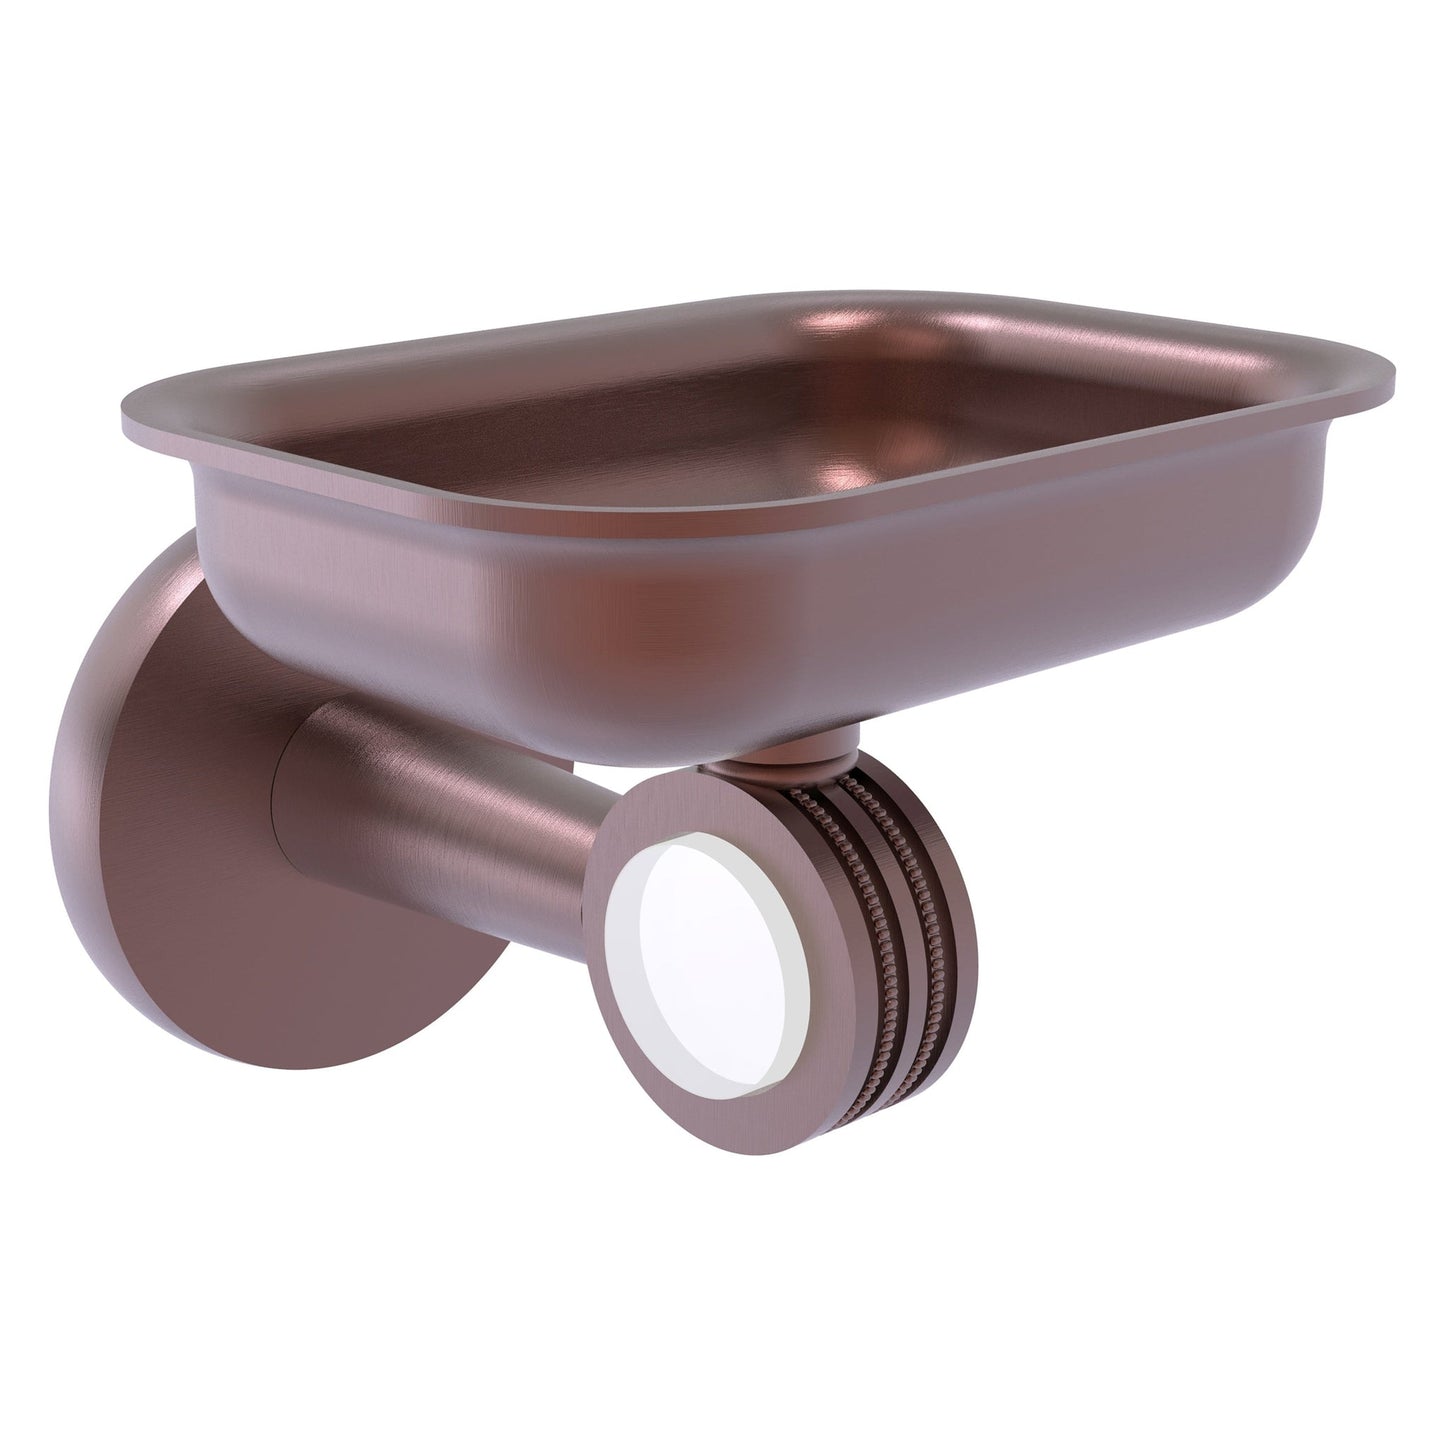 Allied Brass Clearview 4.4" x 3.6" Antique Copper Solid Brass Wall-Mounted Soap Dish Holder With Dotted Accents